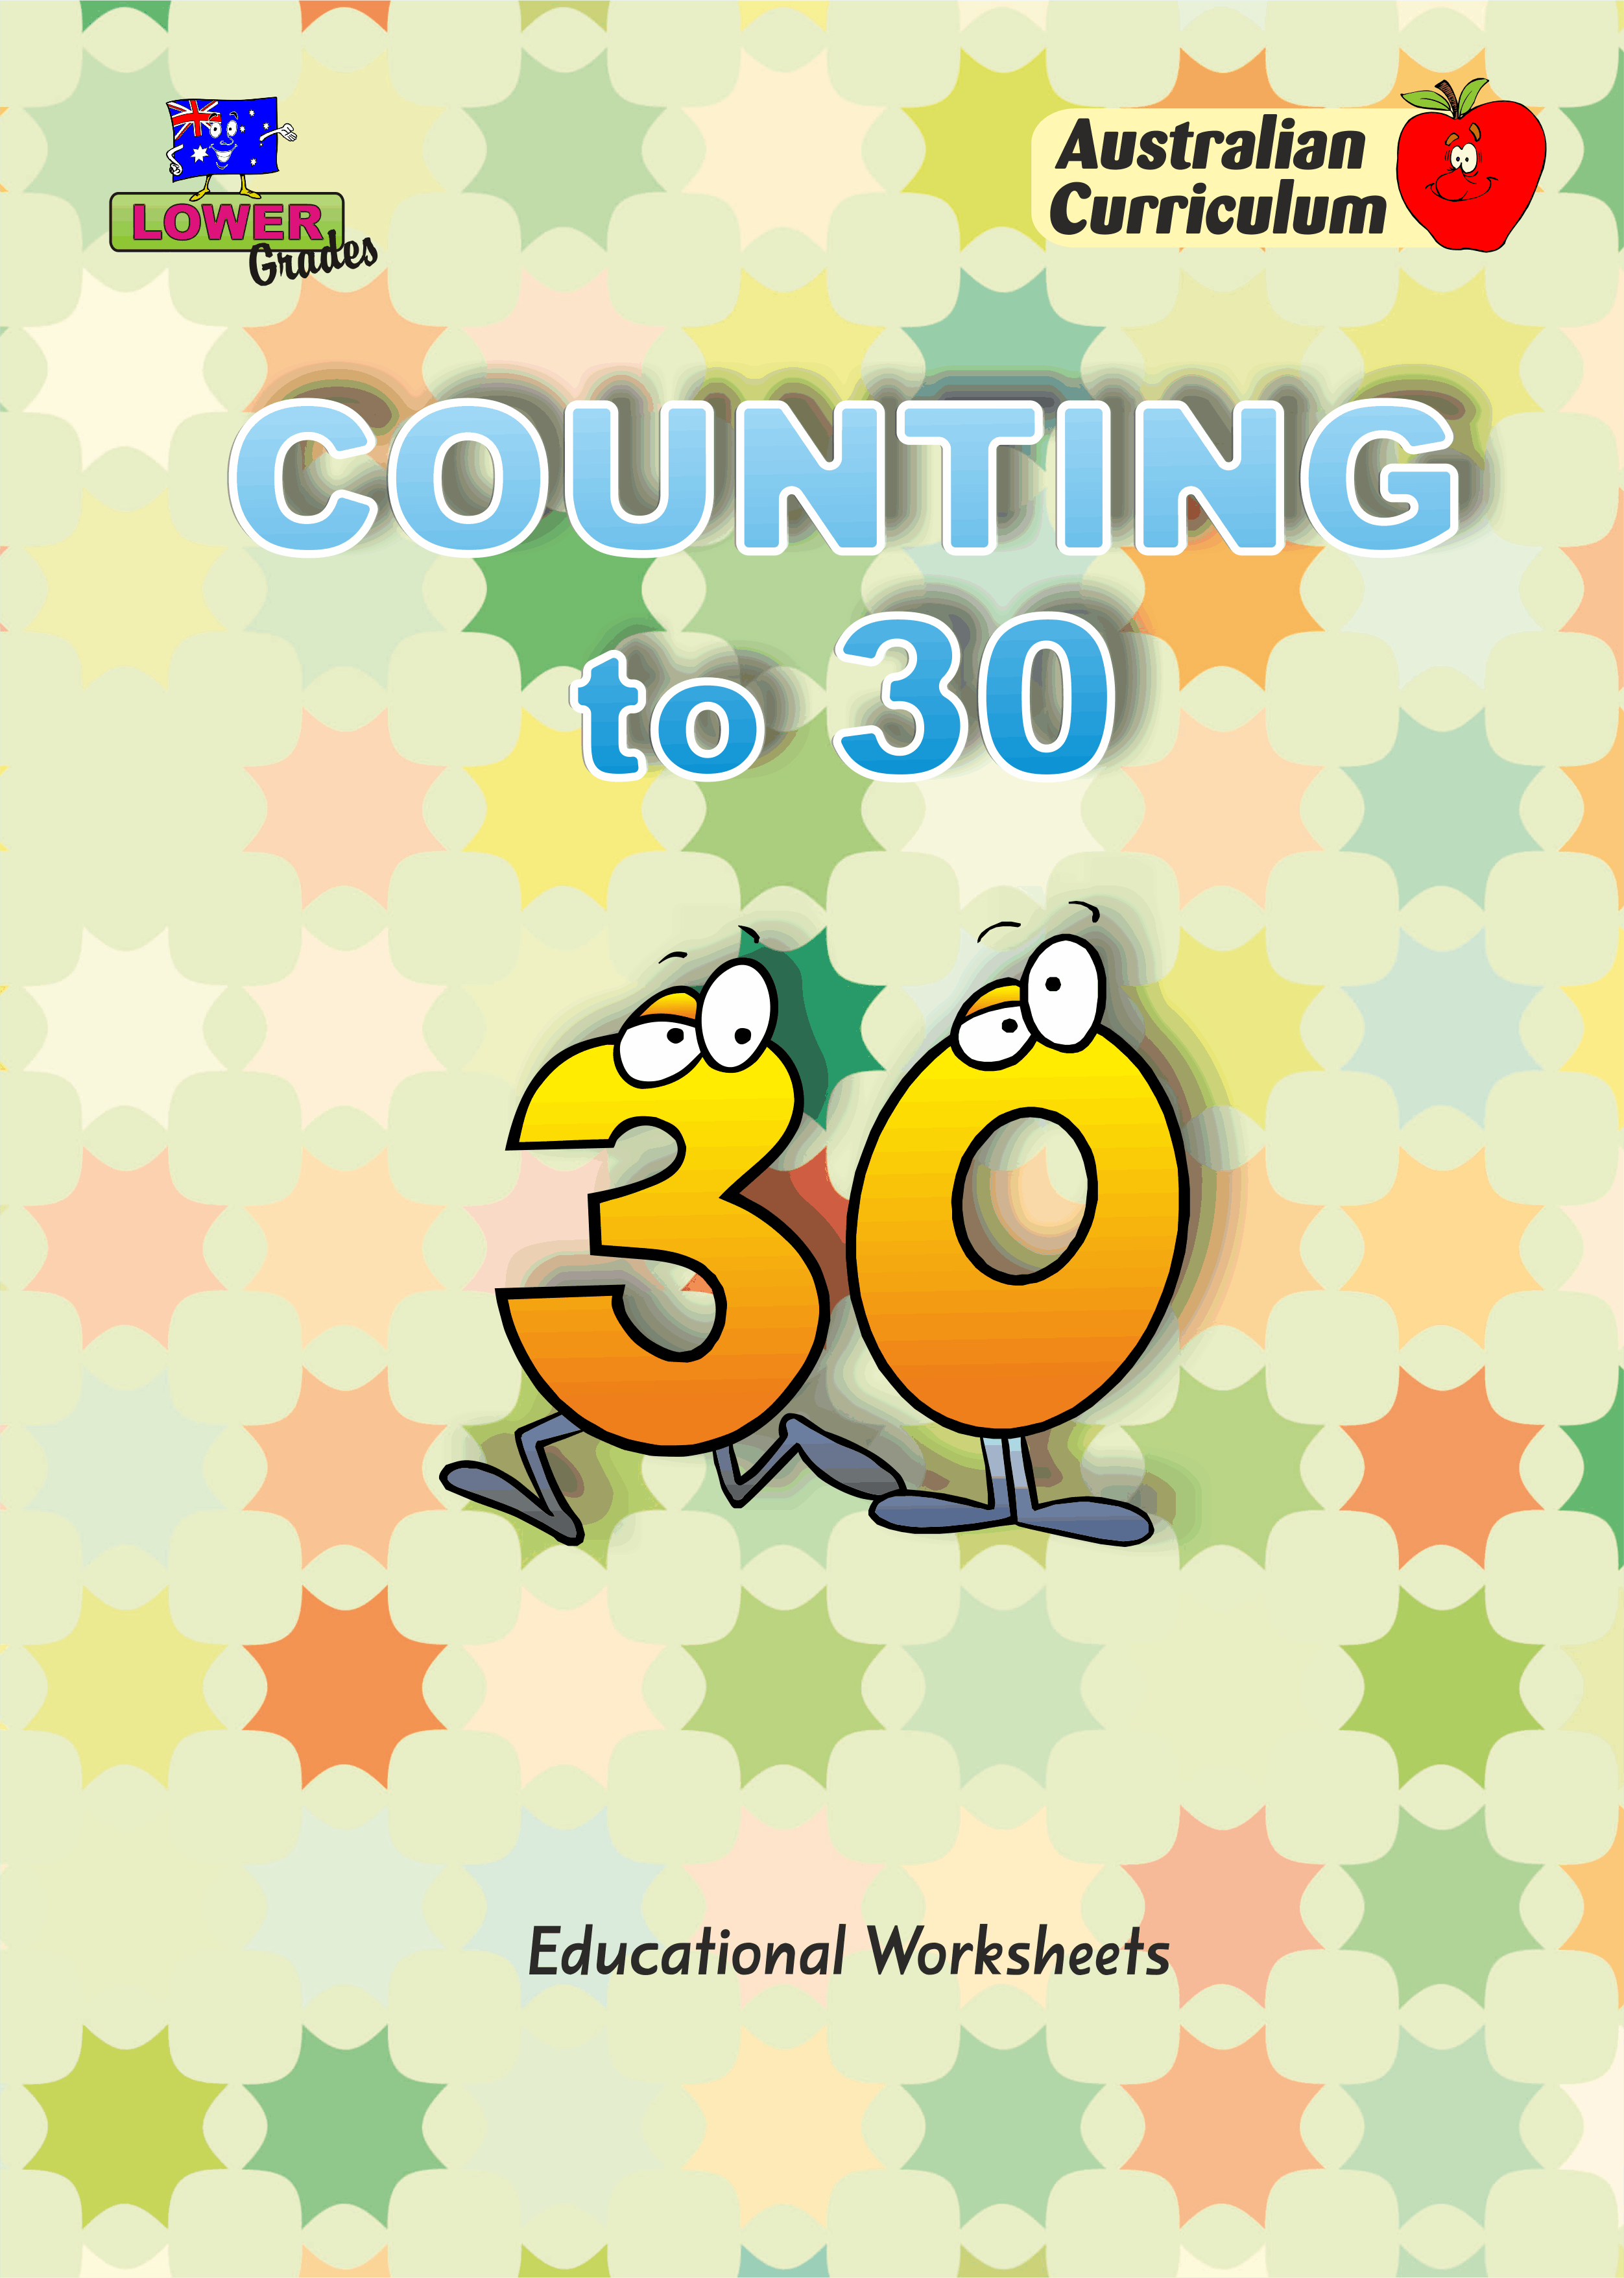 Counting to 30 | Educational Worksheets & Books | Australian Curriculum